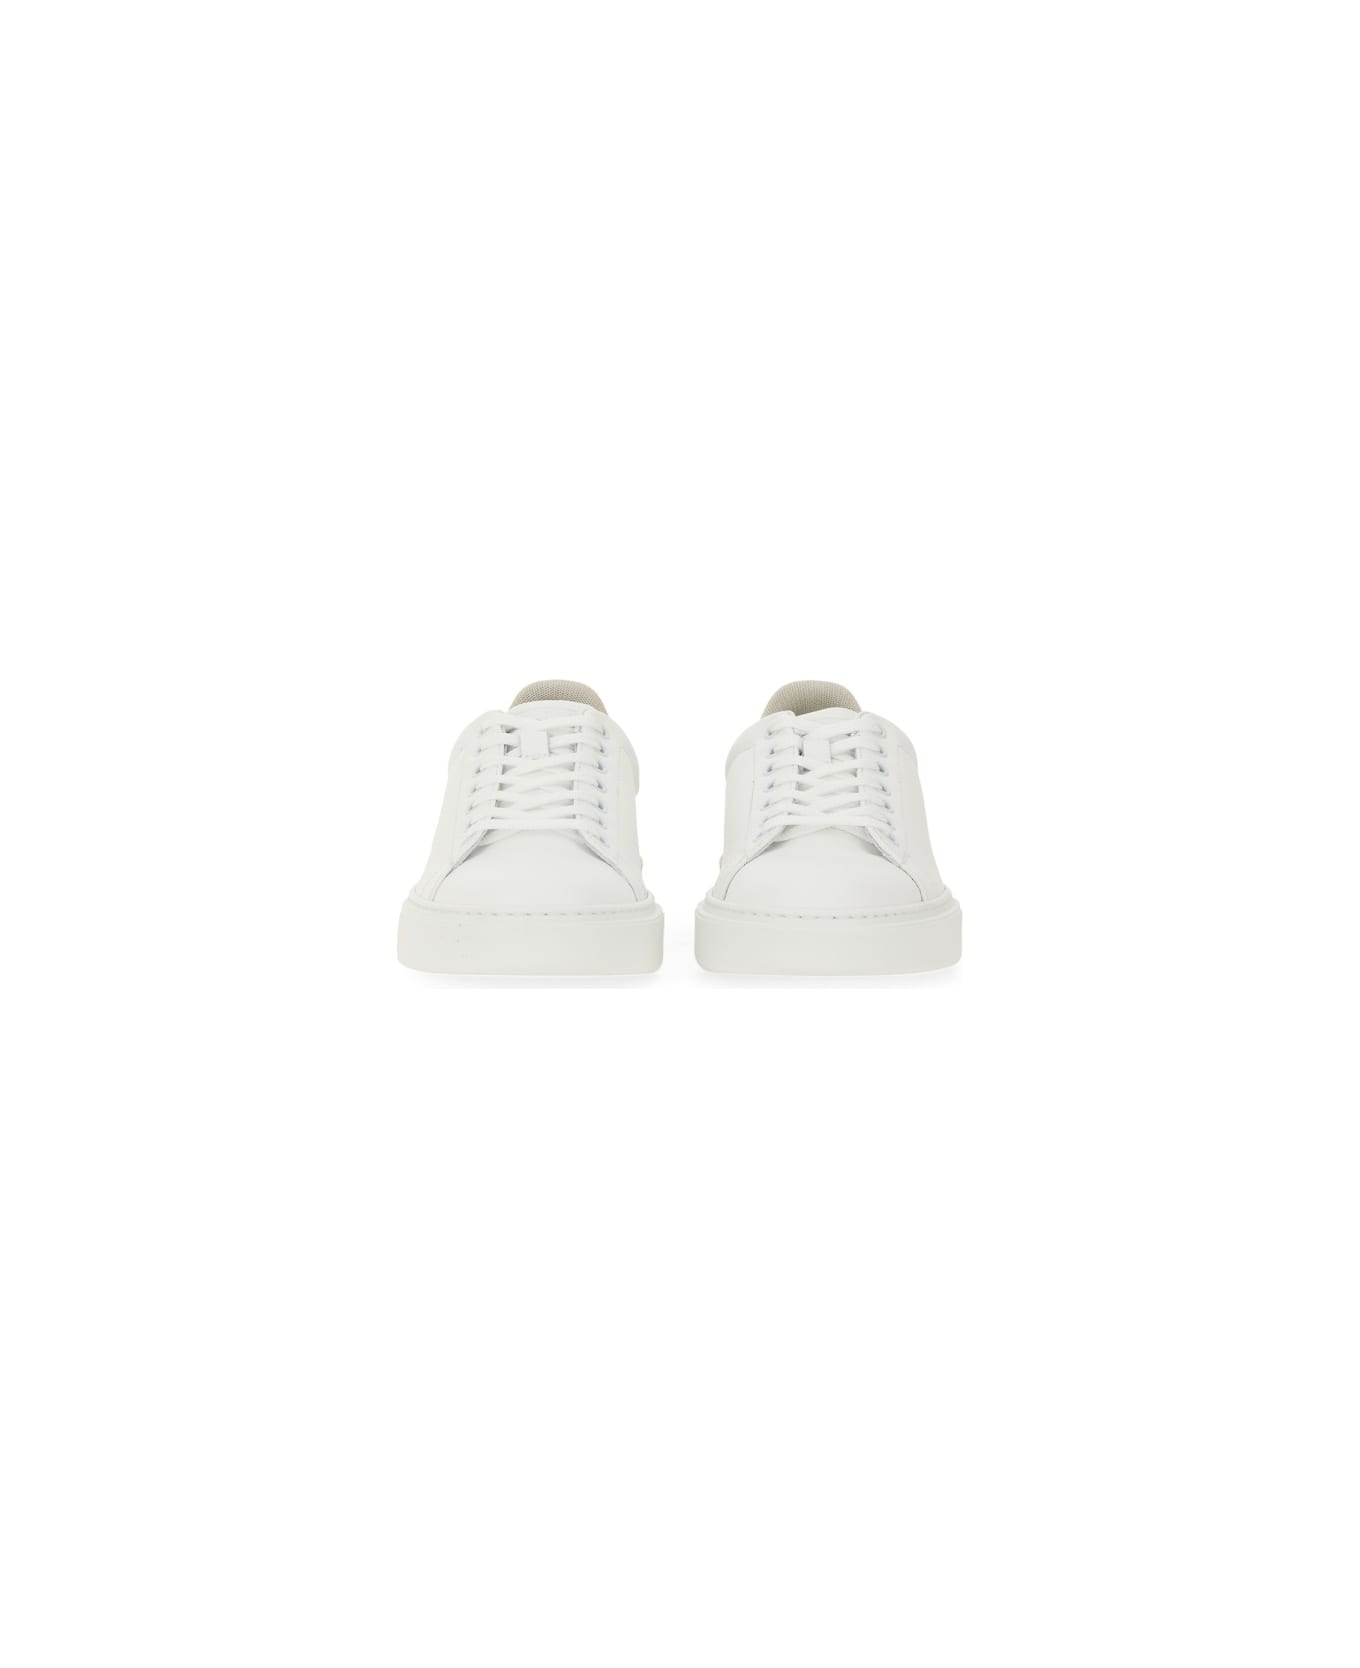 Woolrich Leather Sneaker - White スニーカー